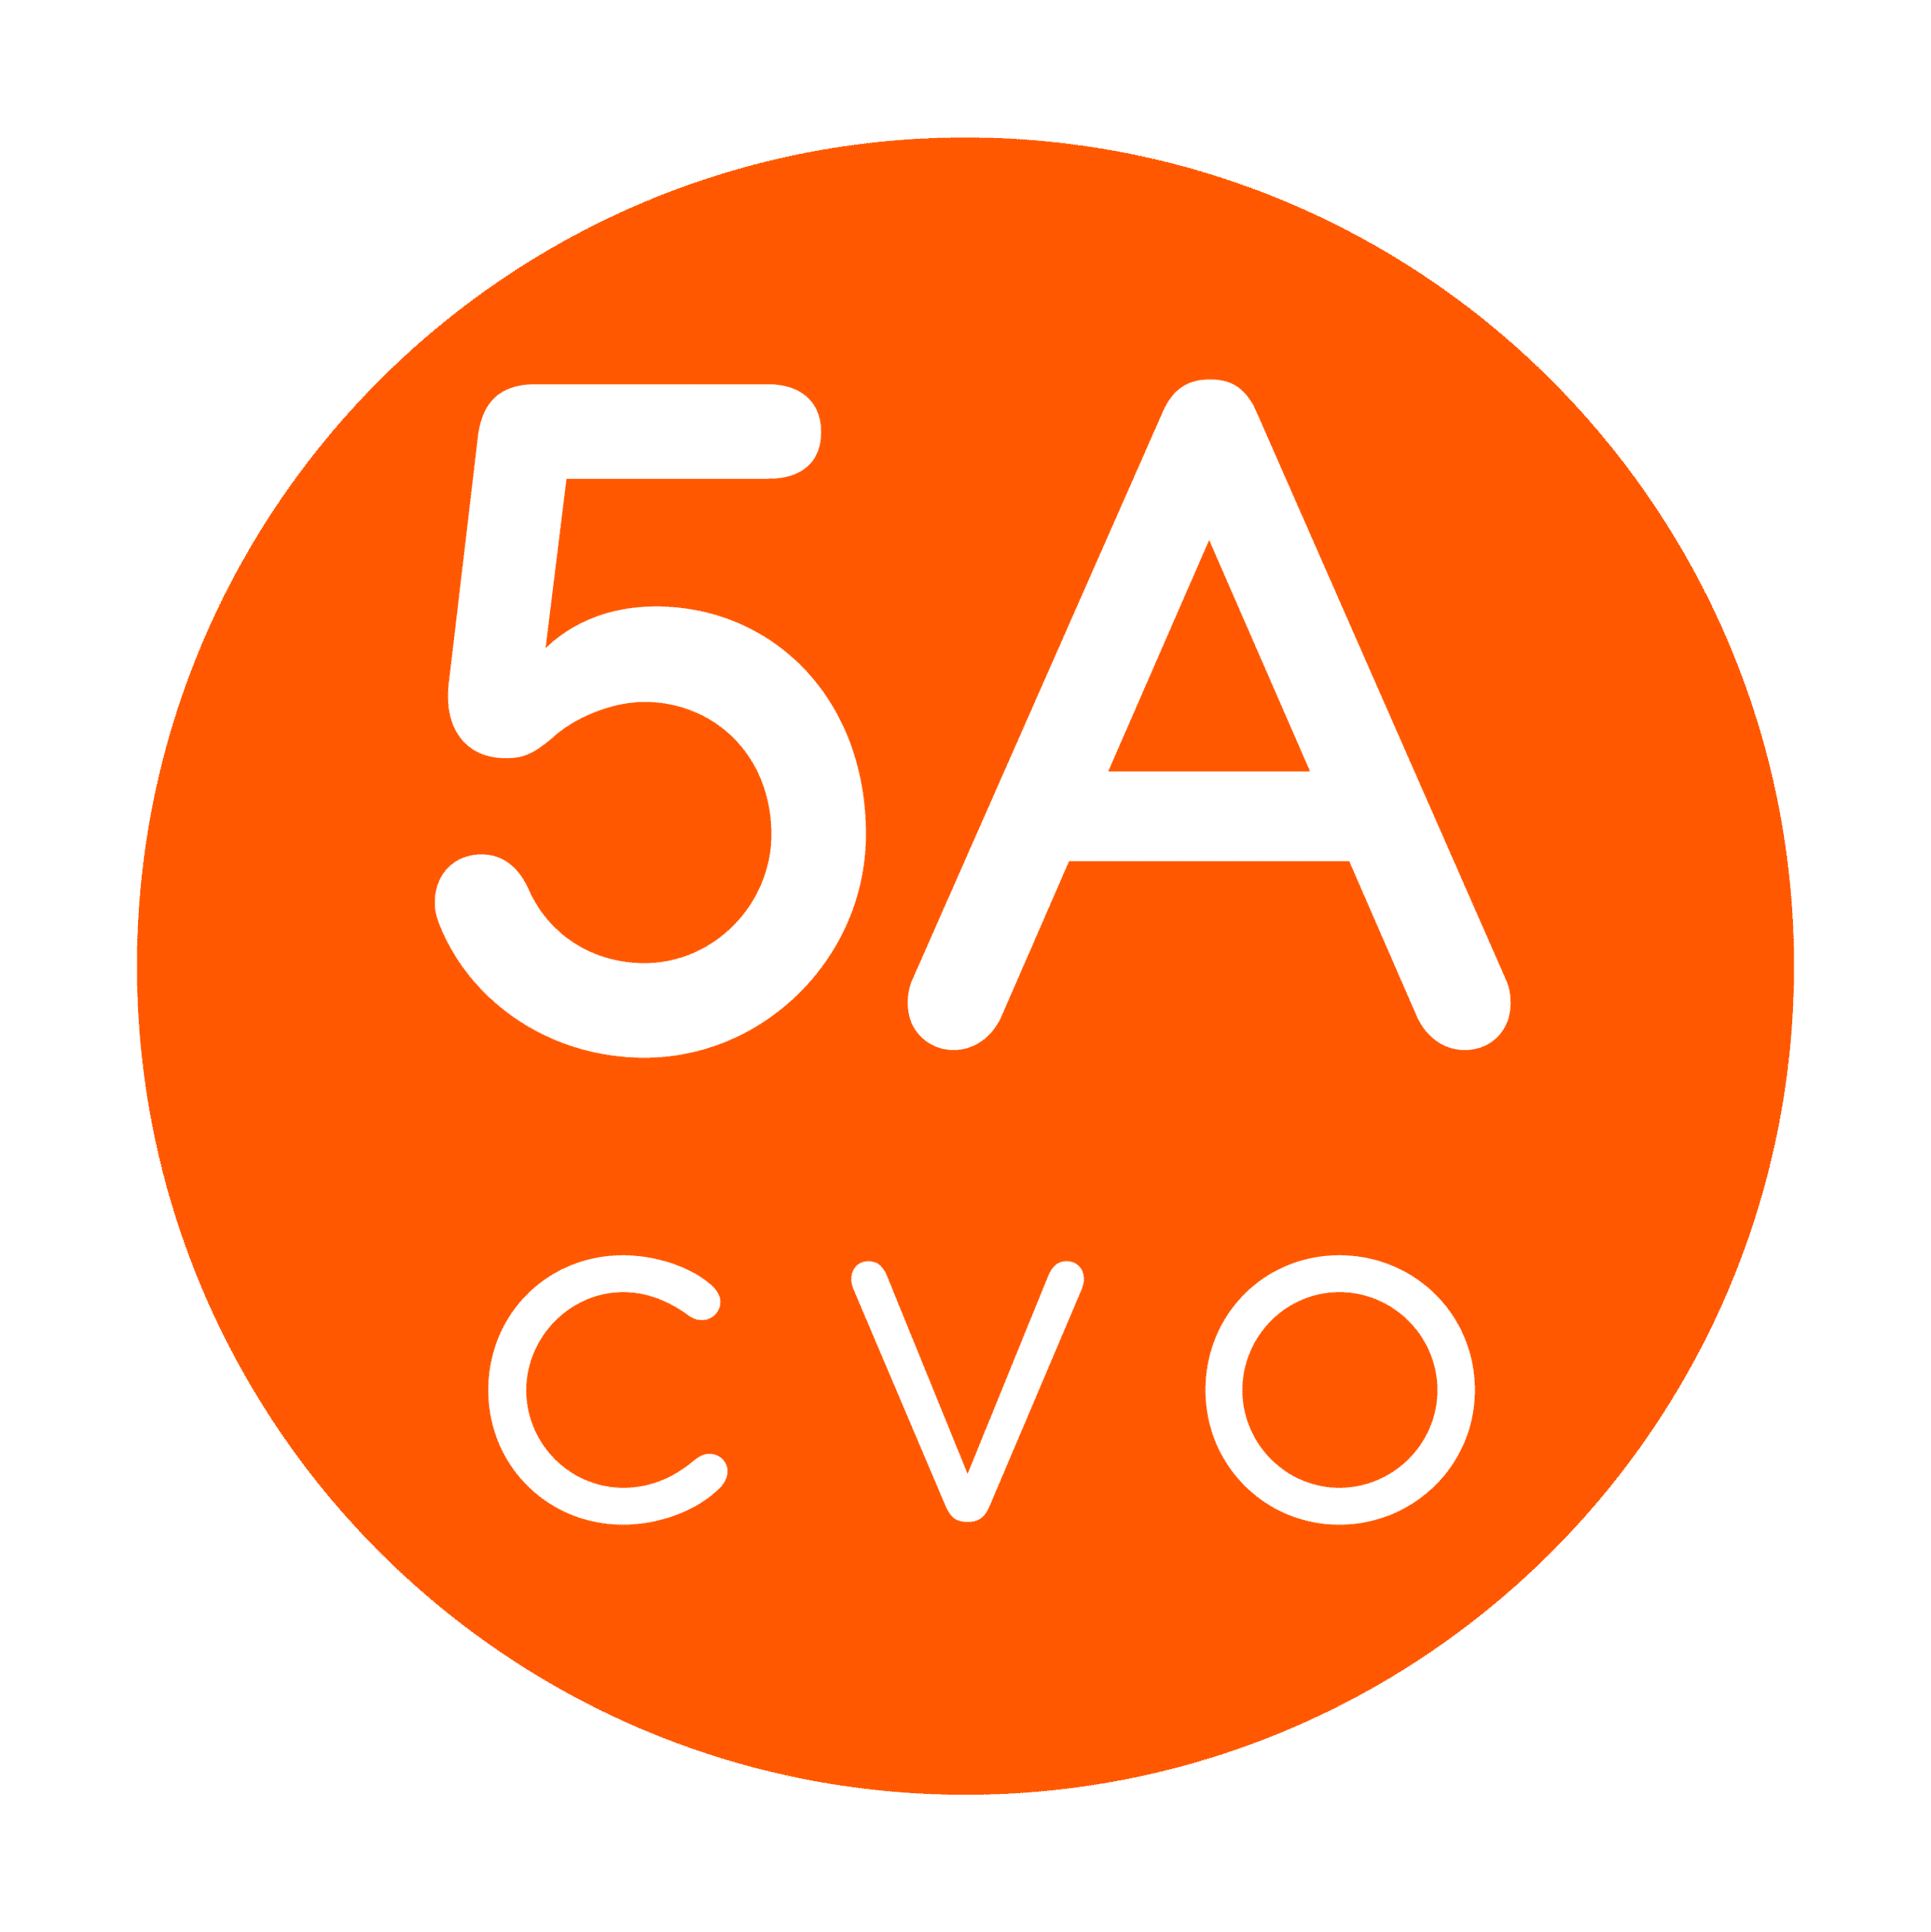 Picture of 5ACVO.com